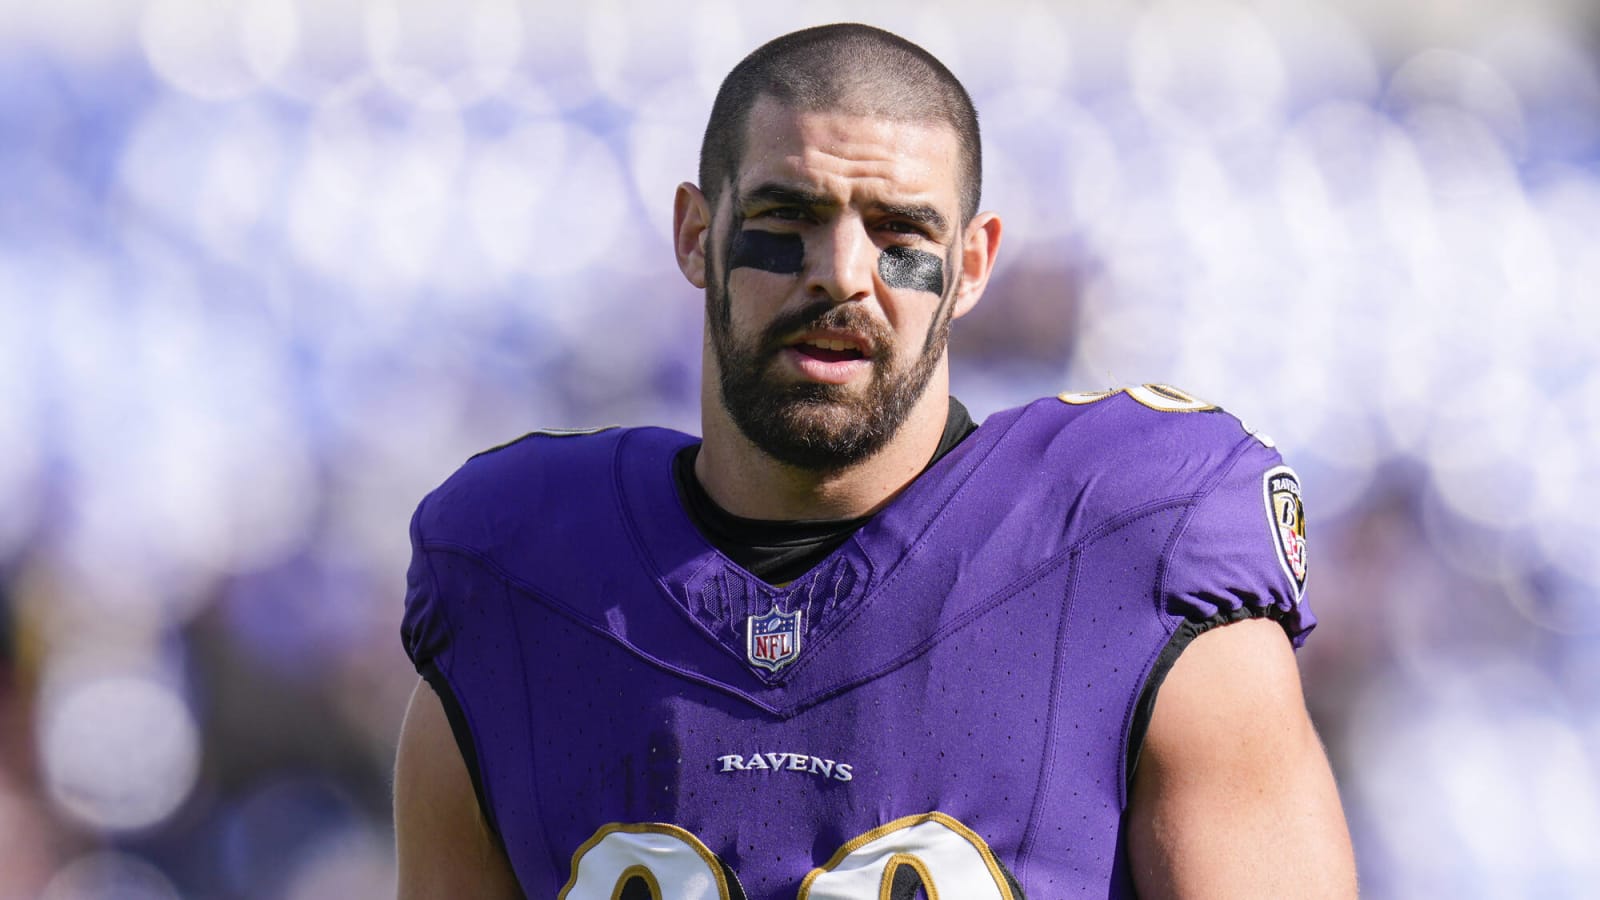 Ravens TE helped save a woman's life on an an airplane